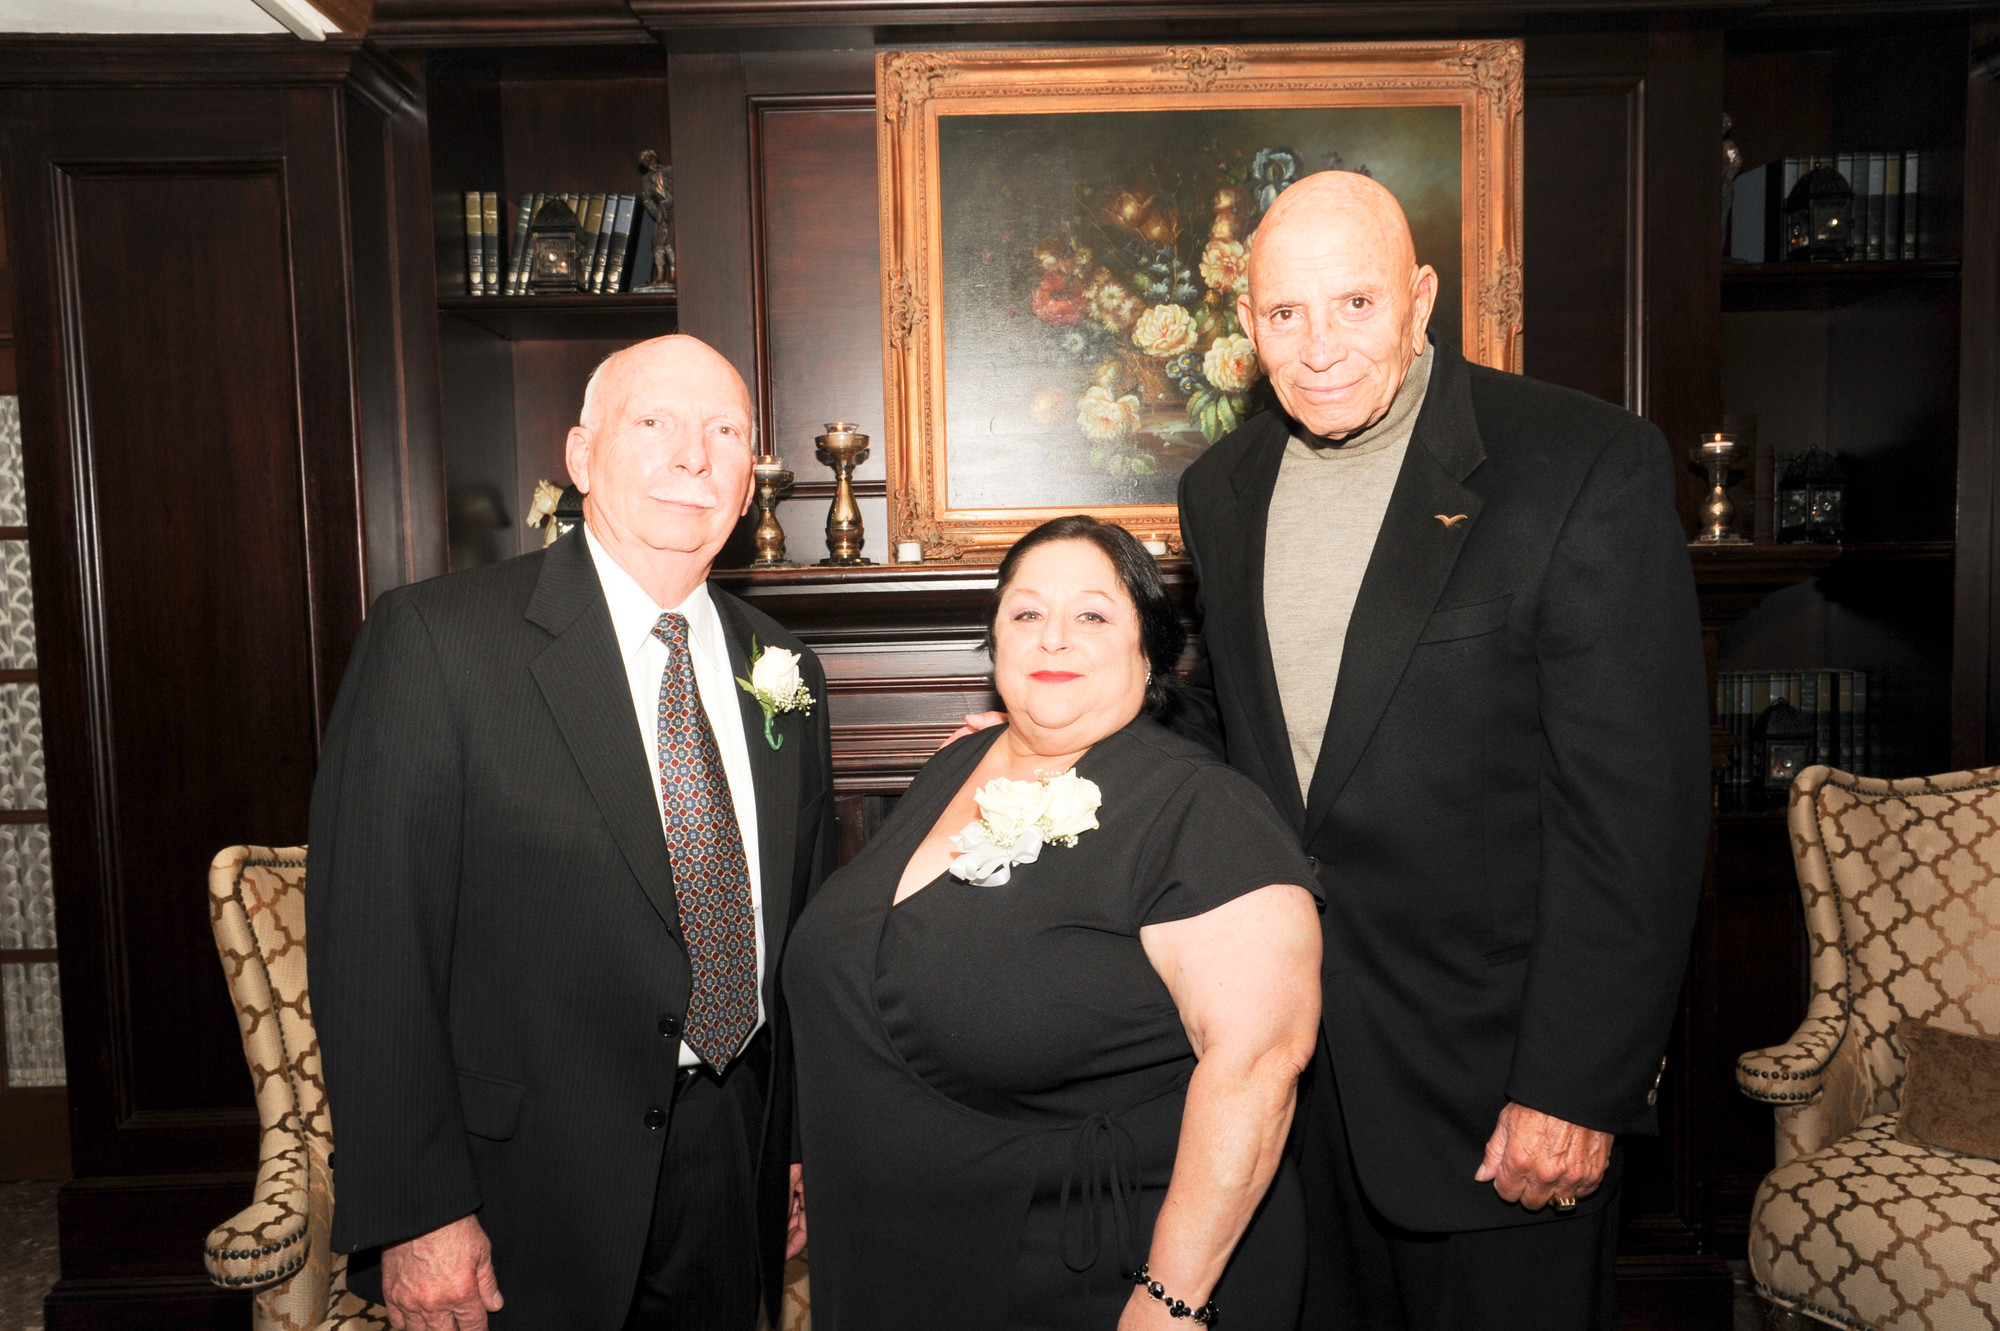 James Ruzicka, Barbra Rubin-Perry and Harvey Weisenberg were honored at the Island Park Chamber of Commerce dinner-dance at the Bridgeview Yacht Club on Oct. 23.